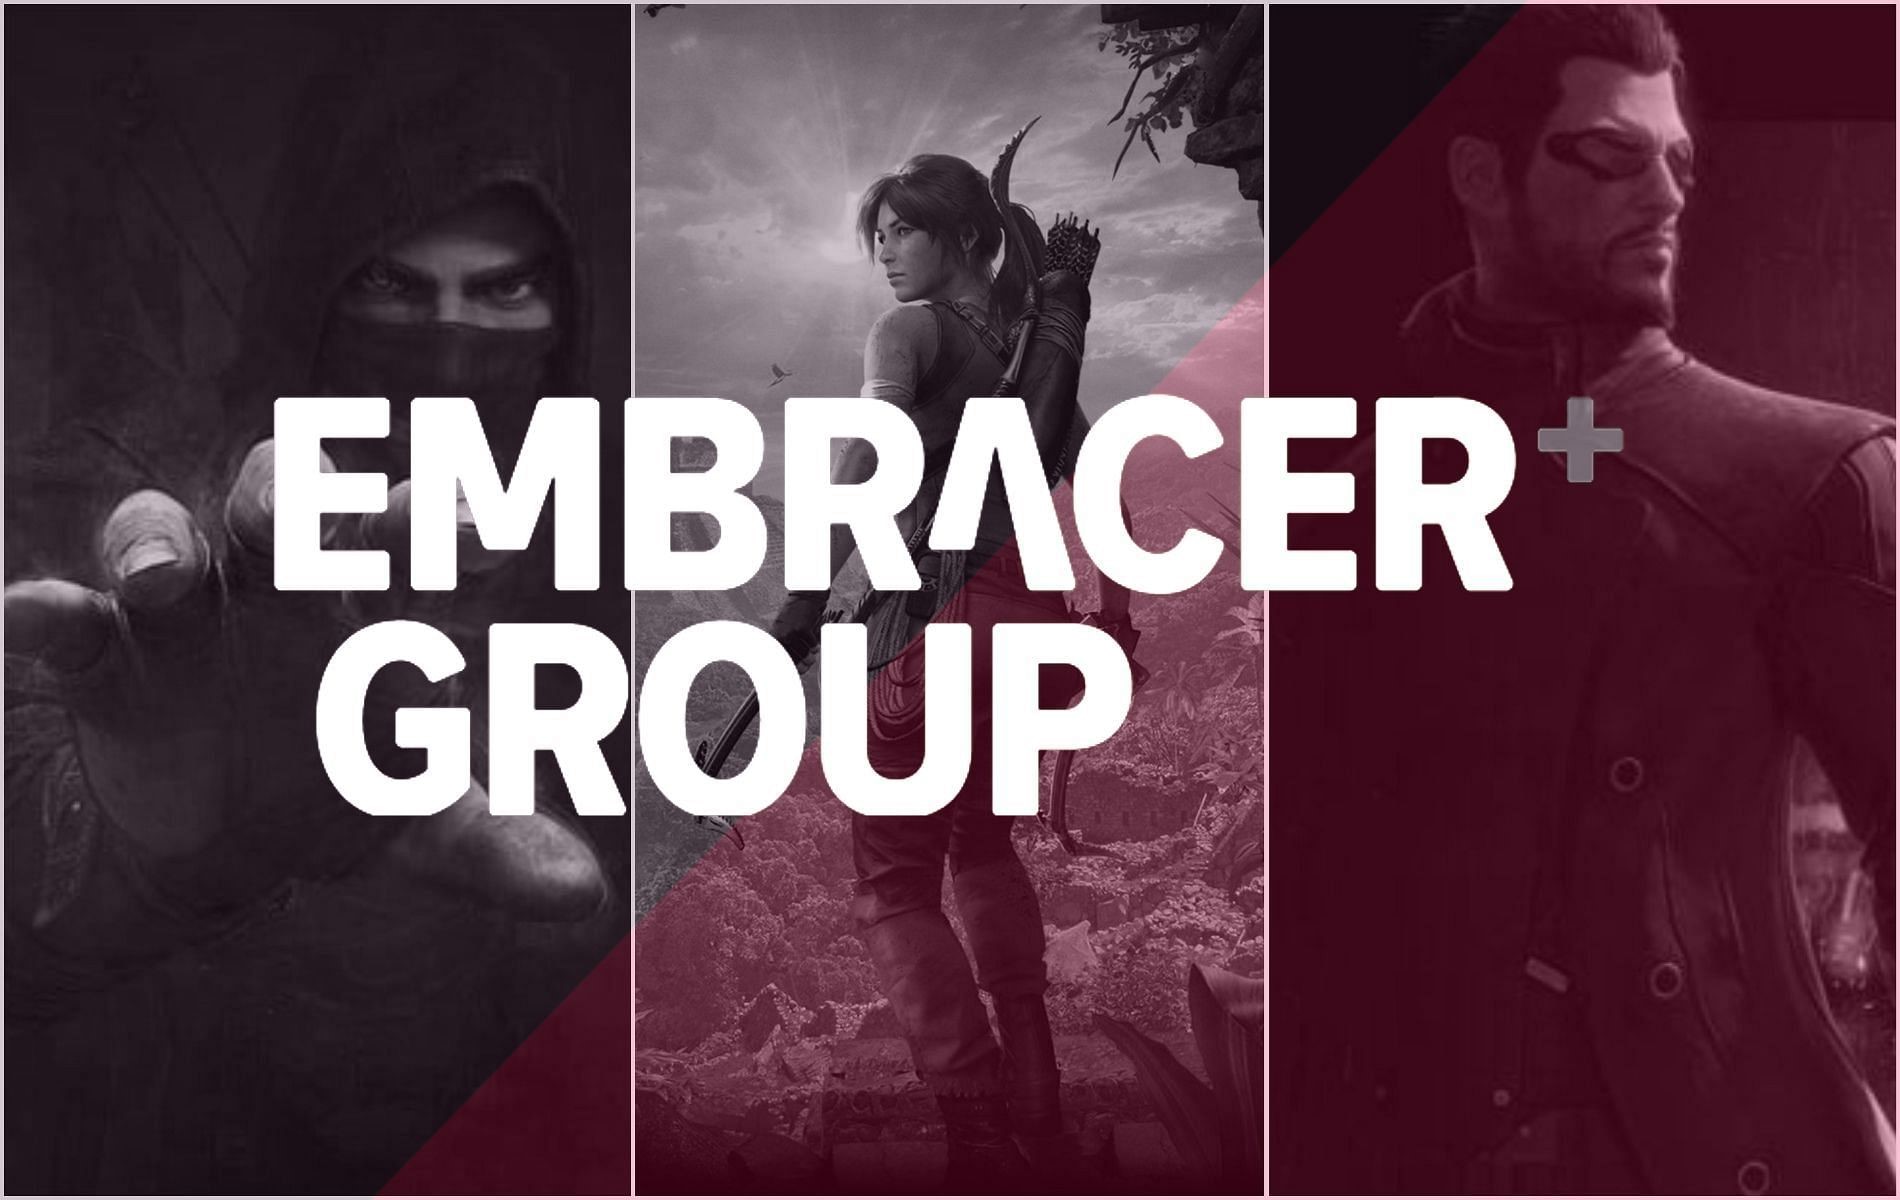 Embracer Has Now Cut 1,387 Roles With Q3 Results Lower Than Expected